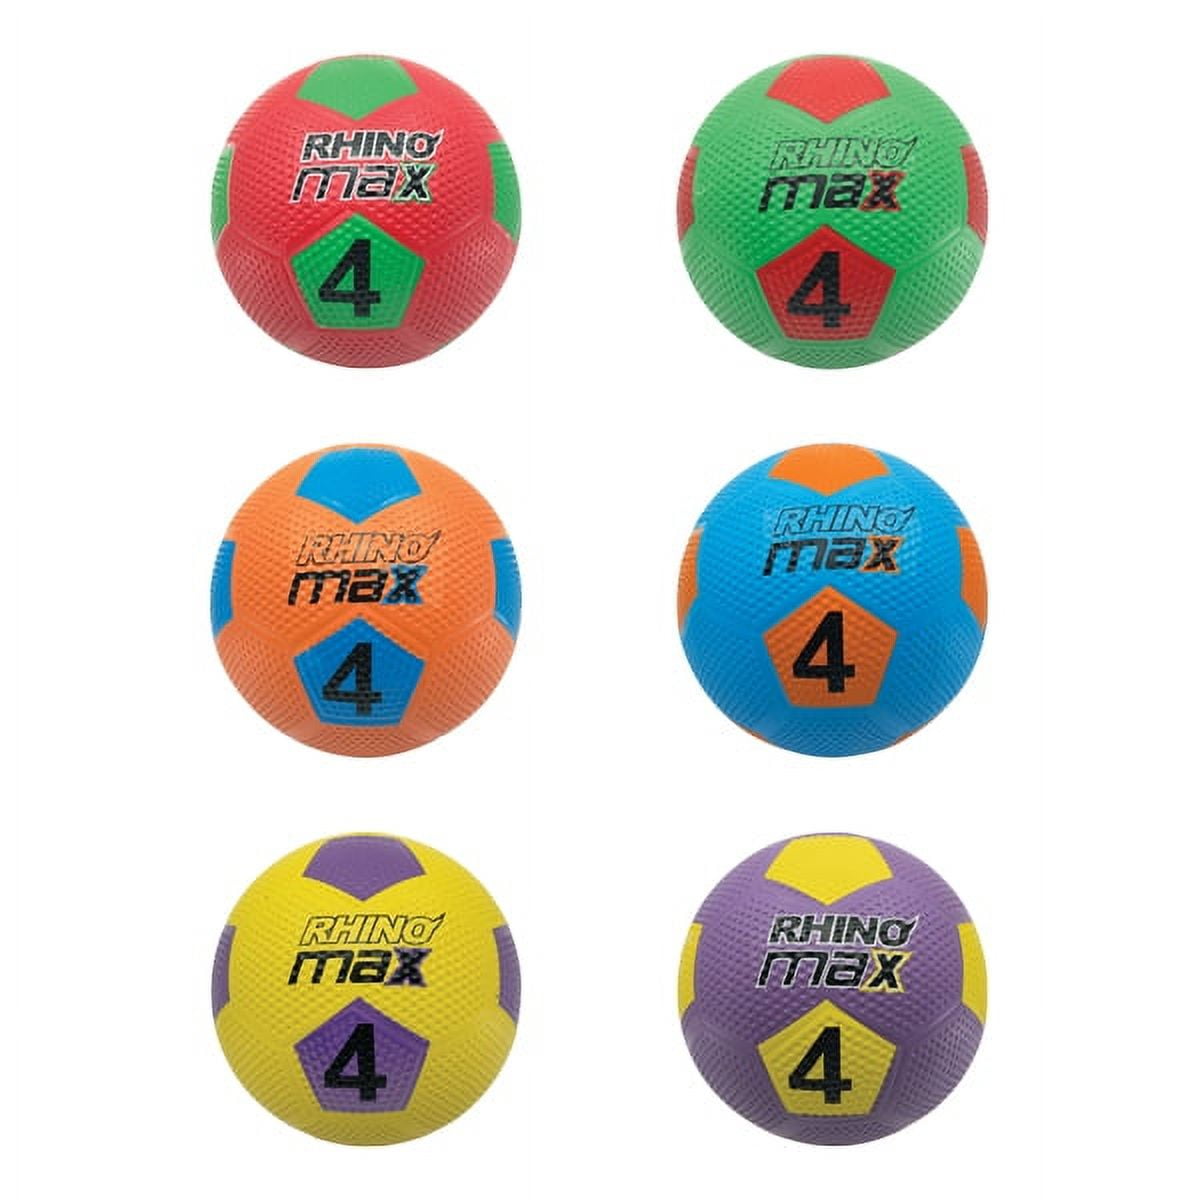 Picture of Champion Sports RMXSBSET 8.5 in. Rhino Max Playground Soccer Ball Set, Multicolor - Size 4 - Set of 6